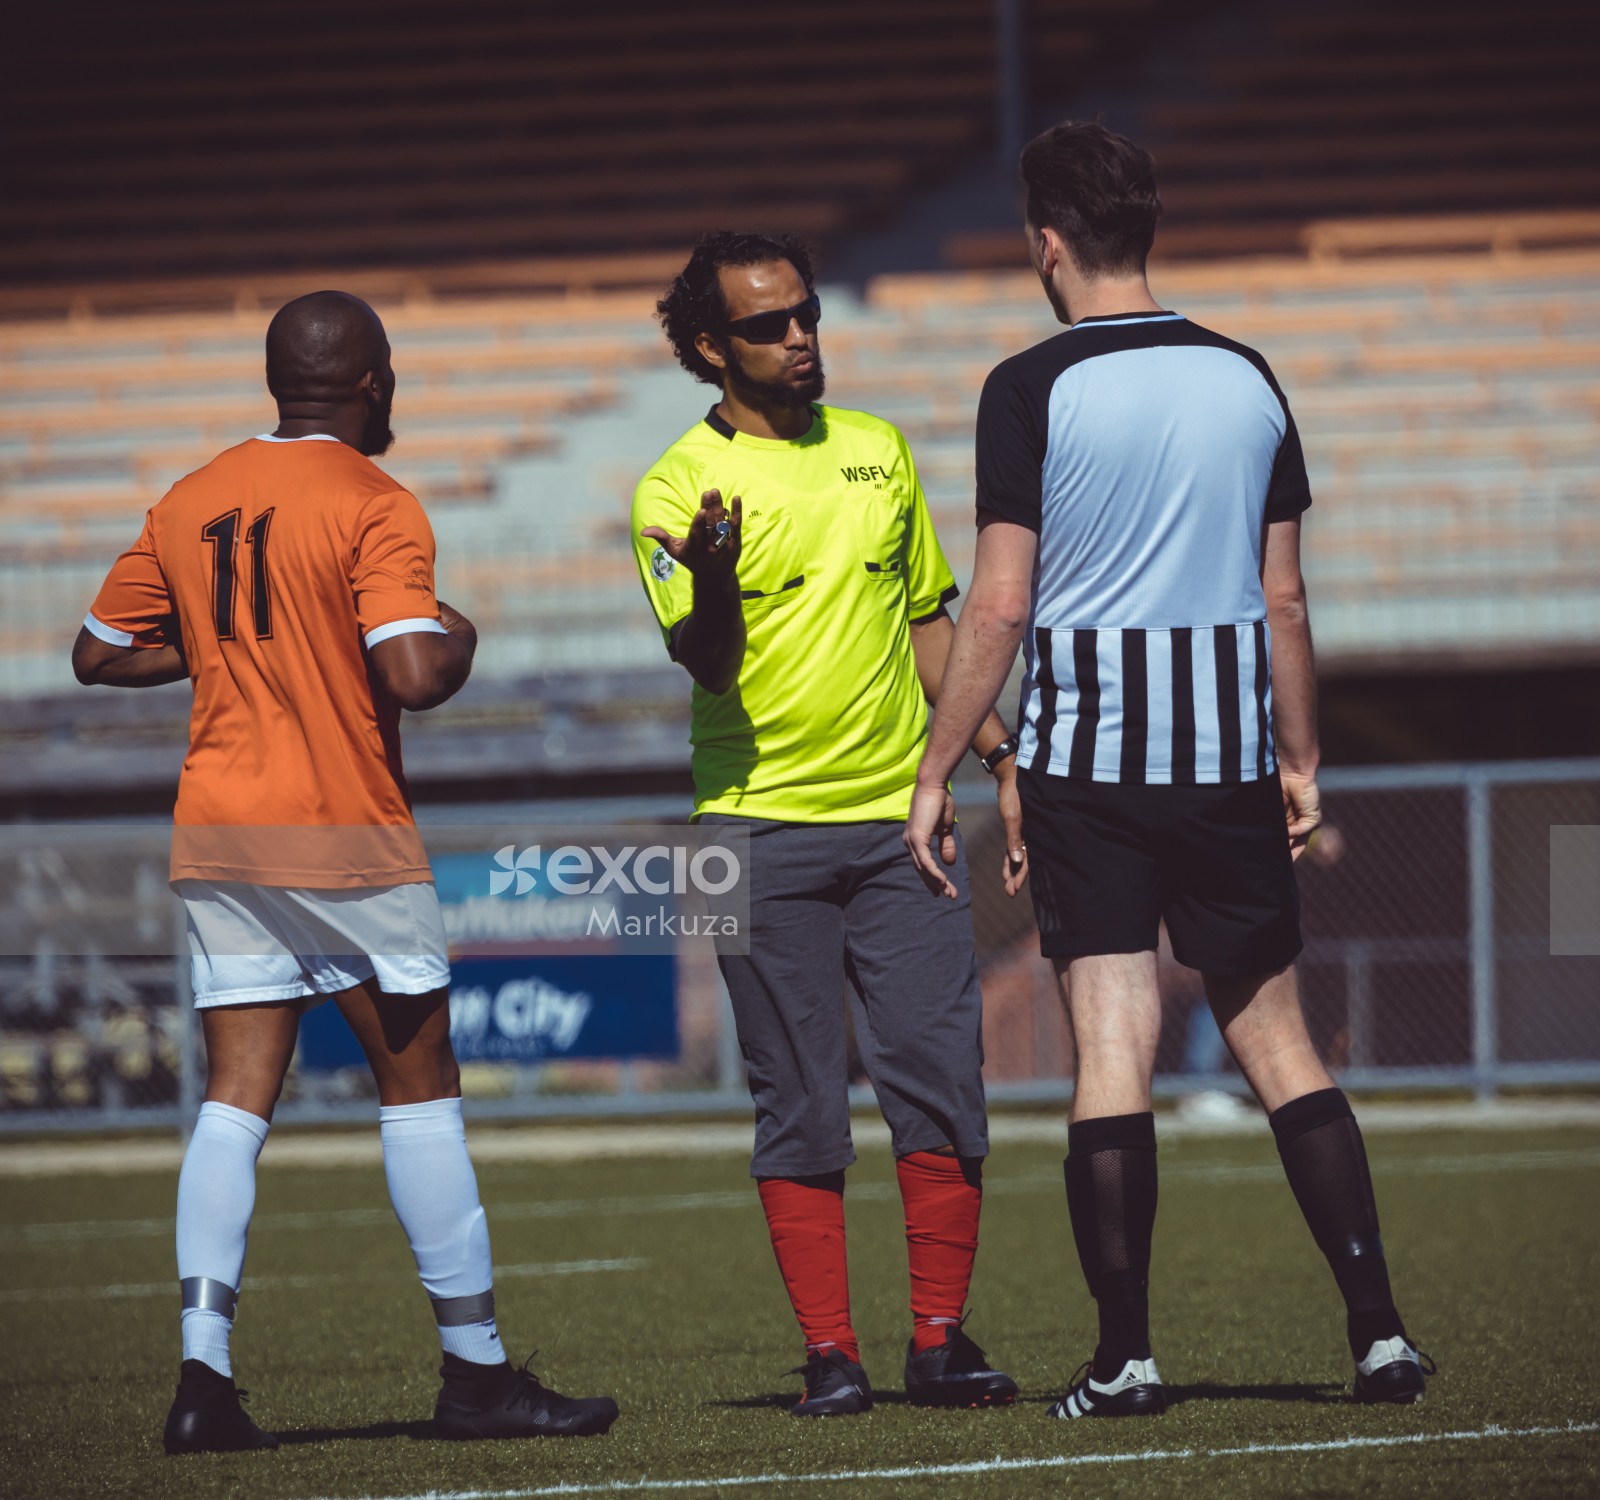 Referee talking to a player in black and white striped shirt - Sports Zone sunday league